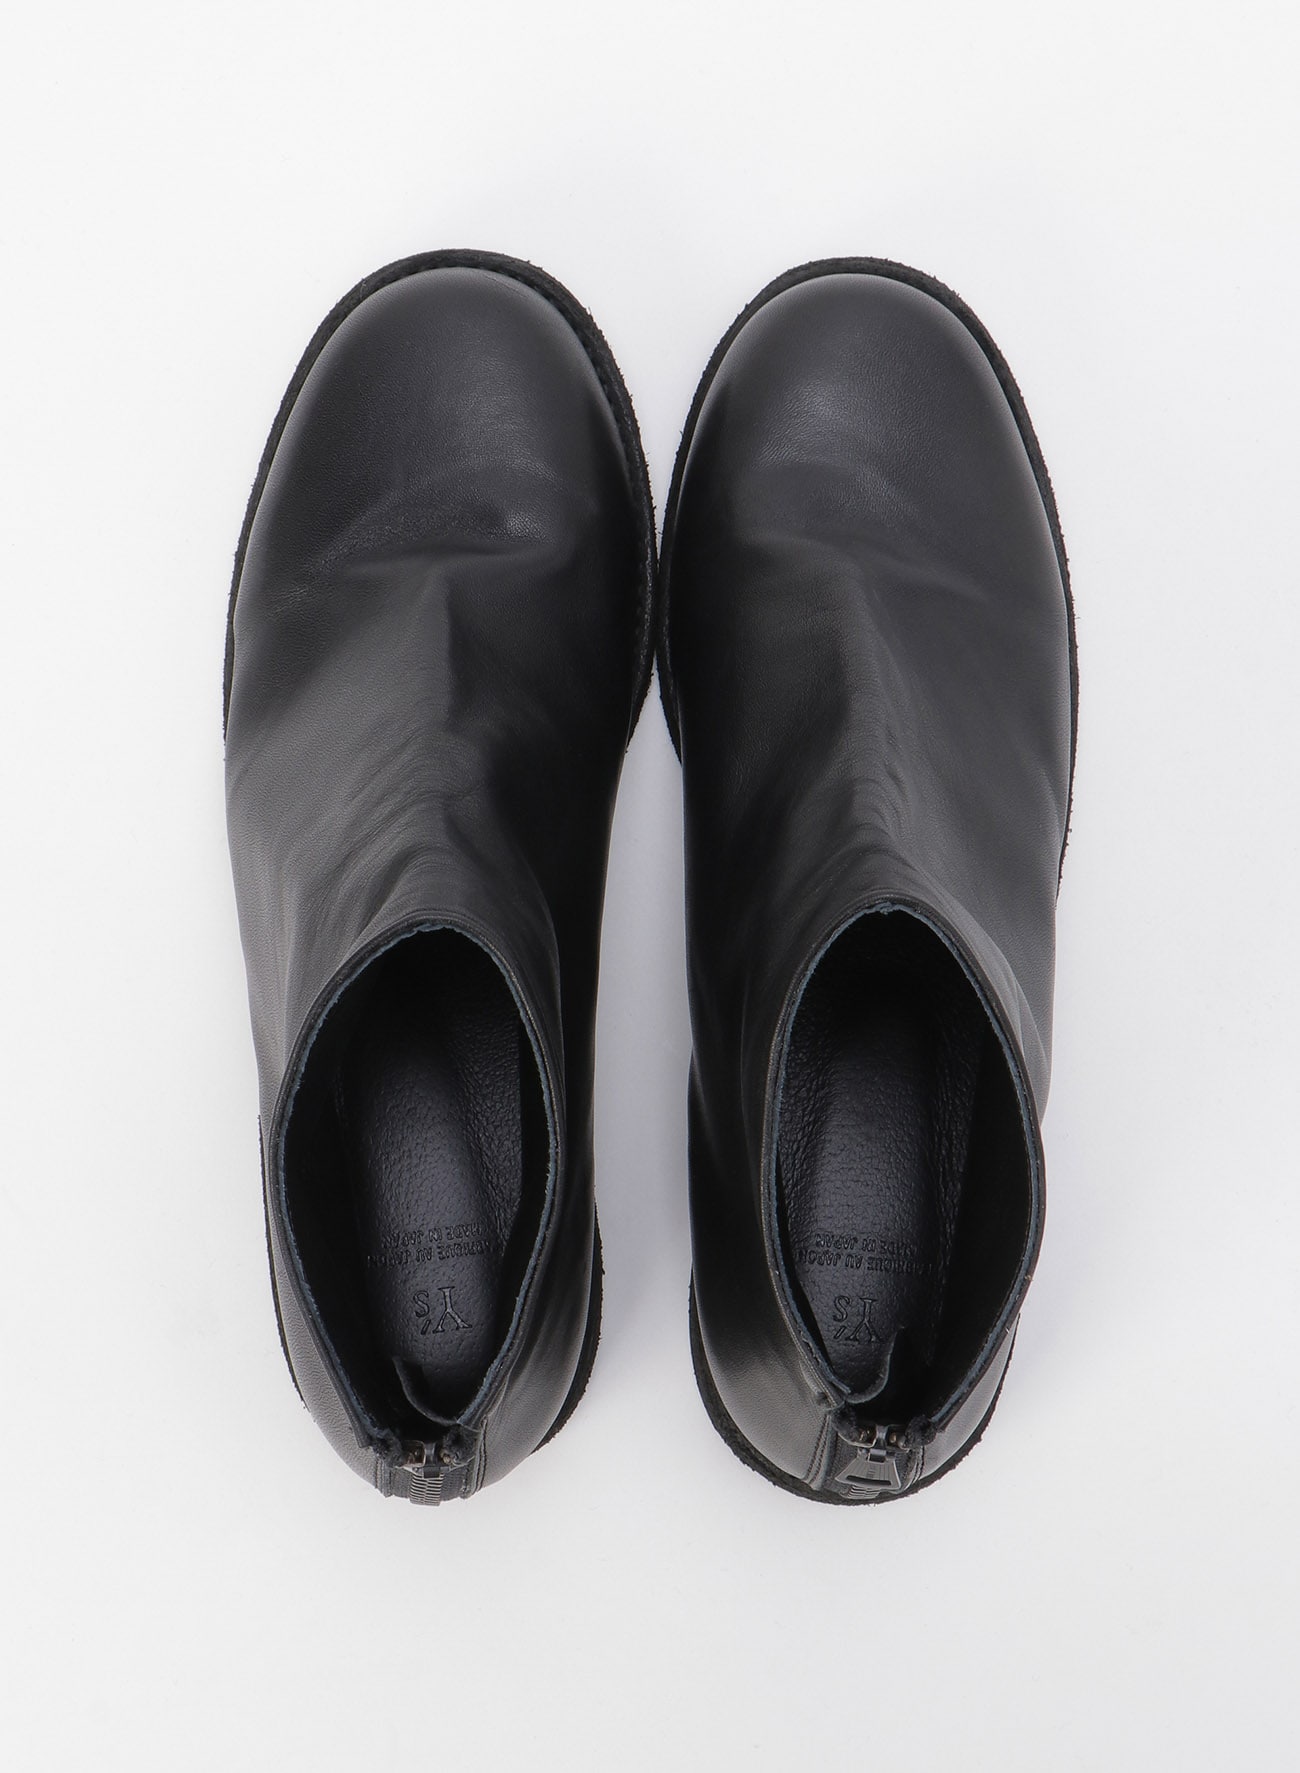 SOFT LEATHER LOW CUT BOOTS WITH BACK ZIPPER(US 3.5 Black): Vintage 1.1｜THE  SHOP YOHJI YAMAMOTO